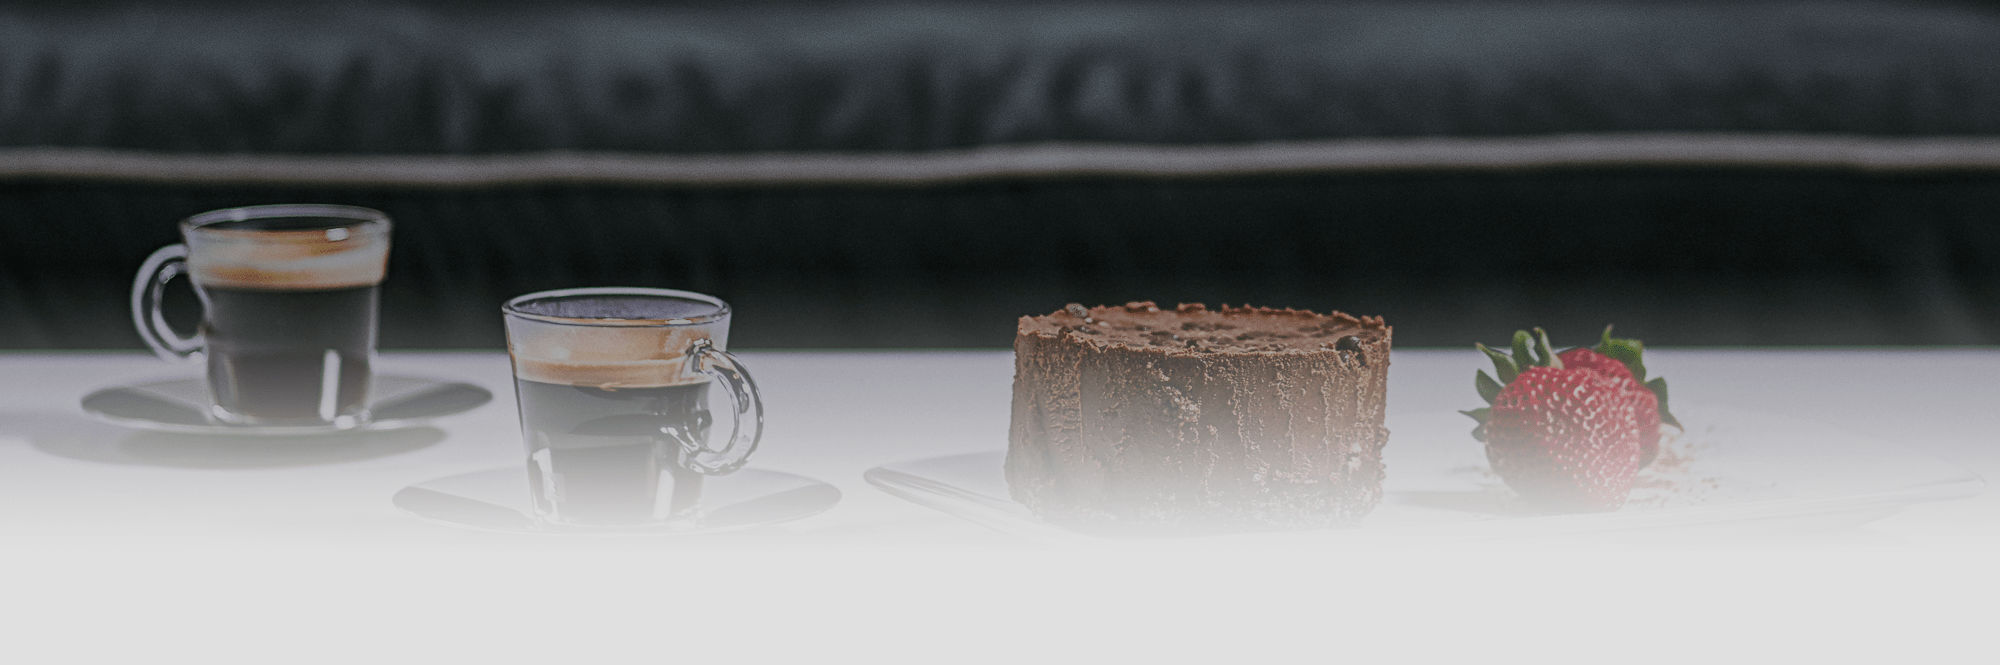 Contact header featuring coffee and cake